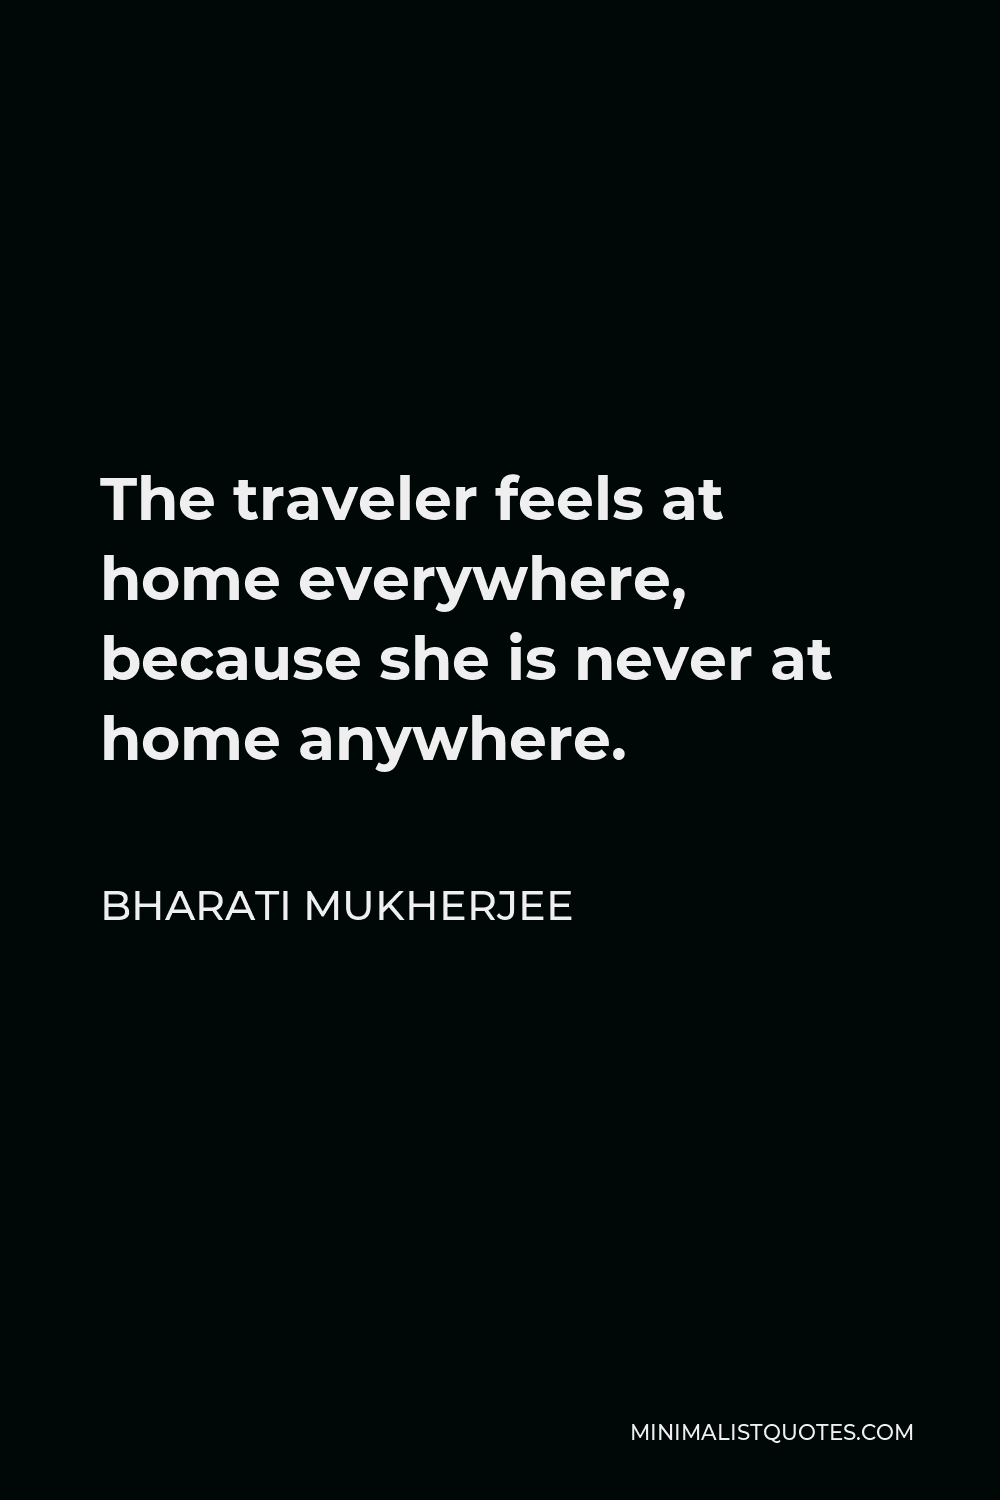 Bharati Mukherjee Quote - The traveler feels at home everywhere, because she is never at home anywhere.